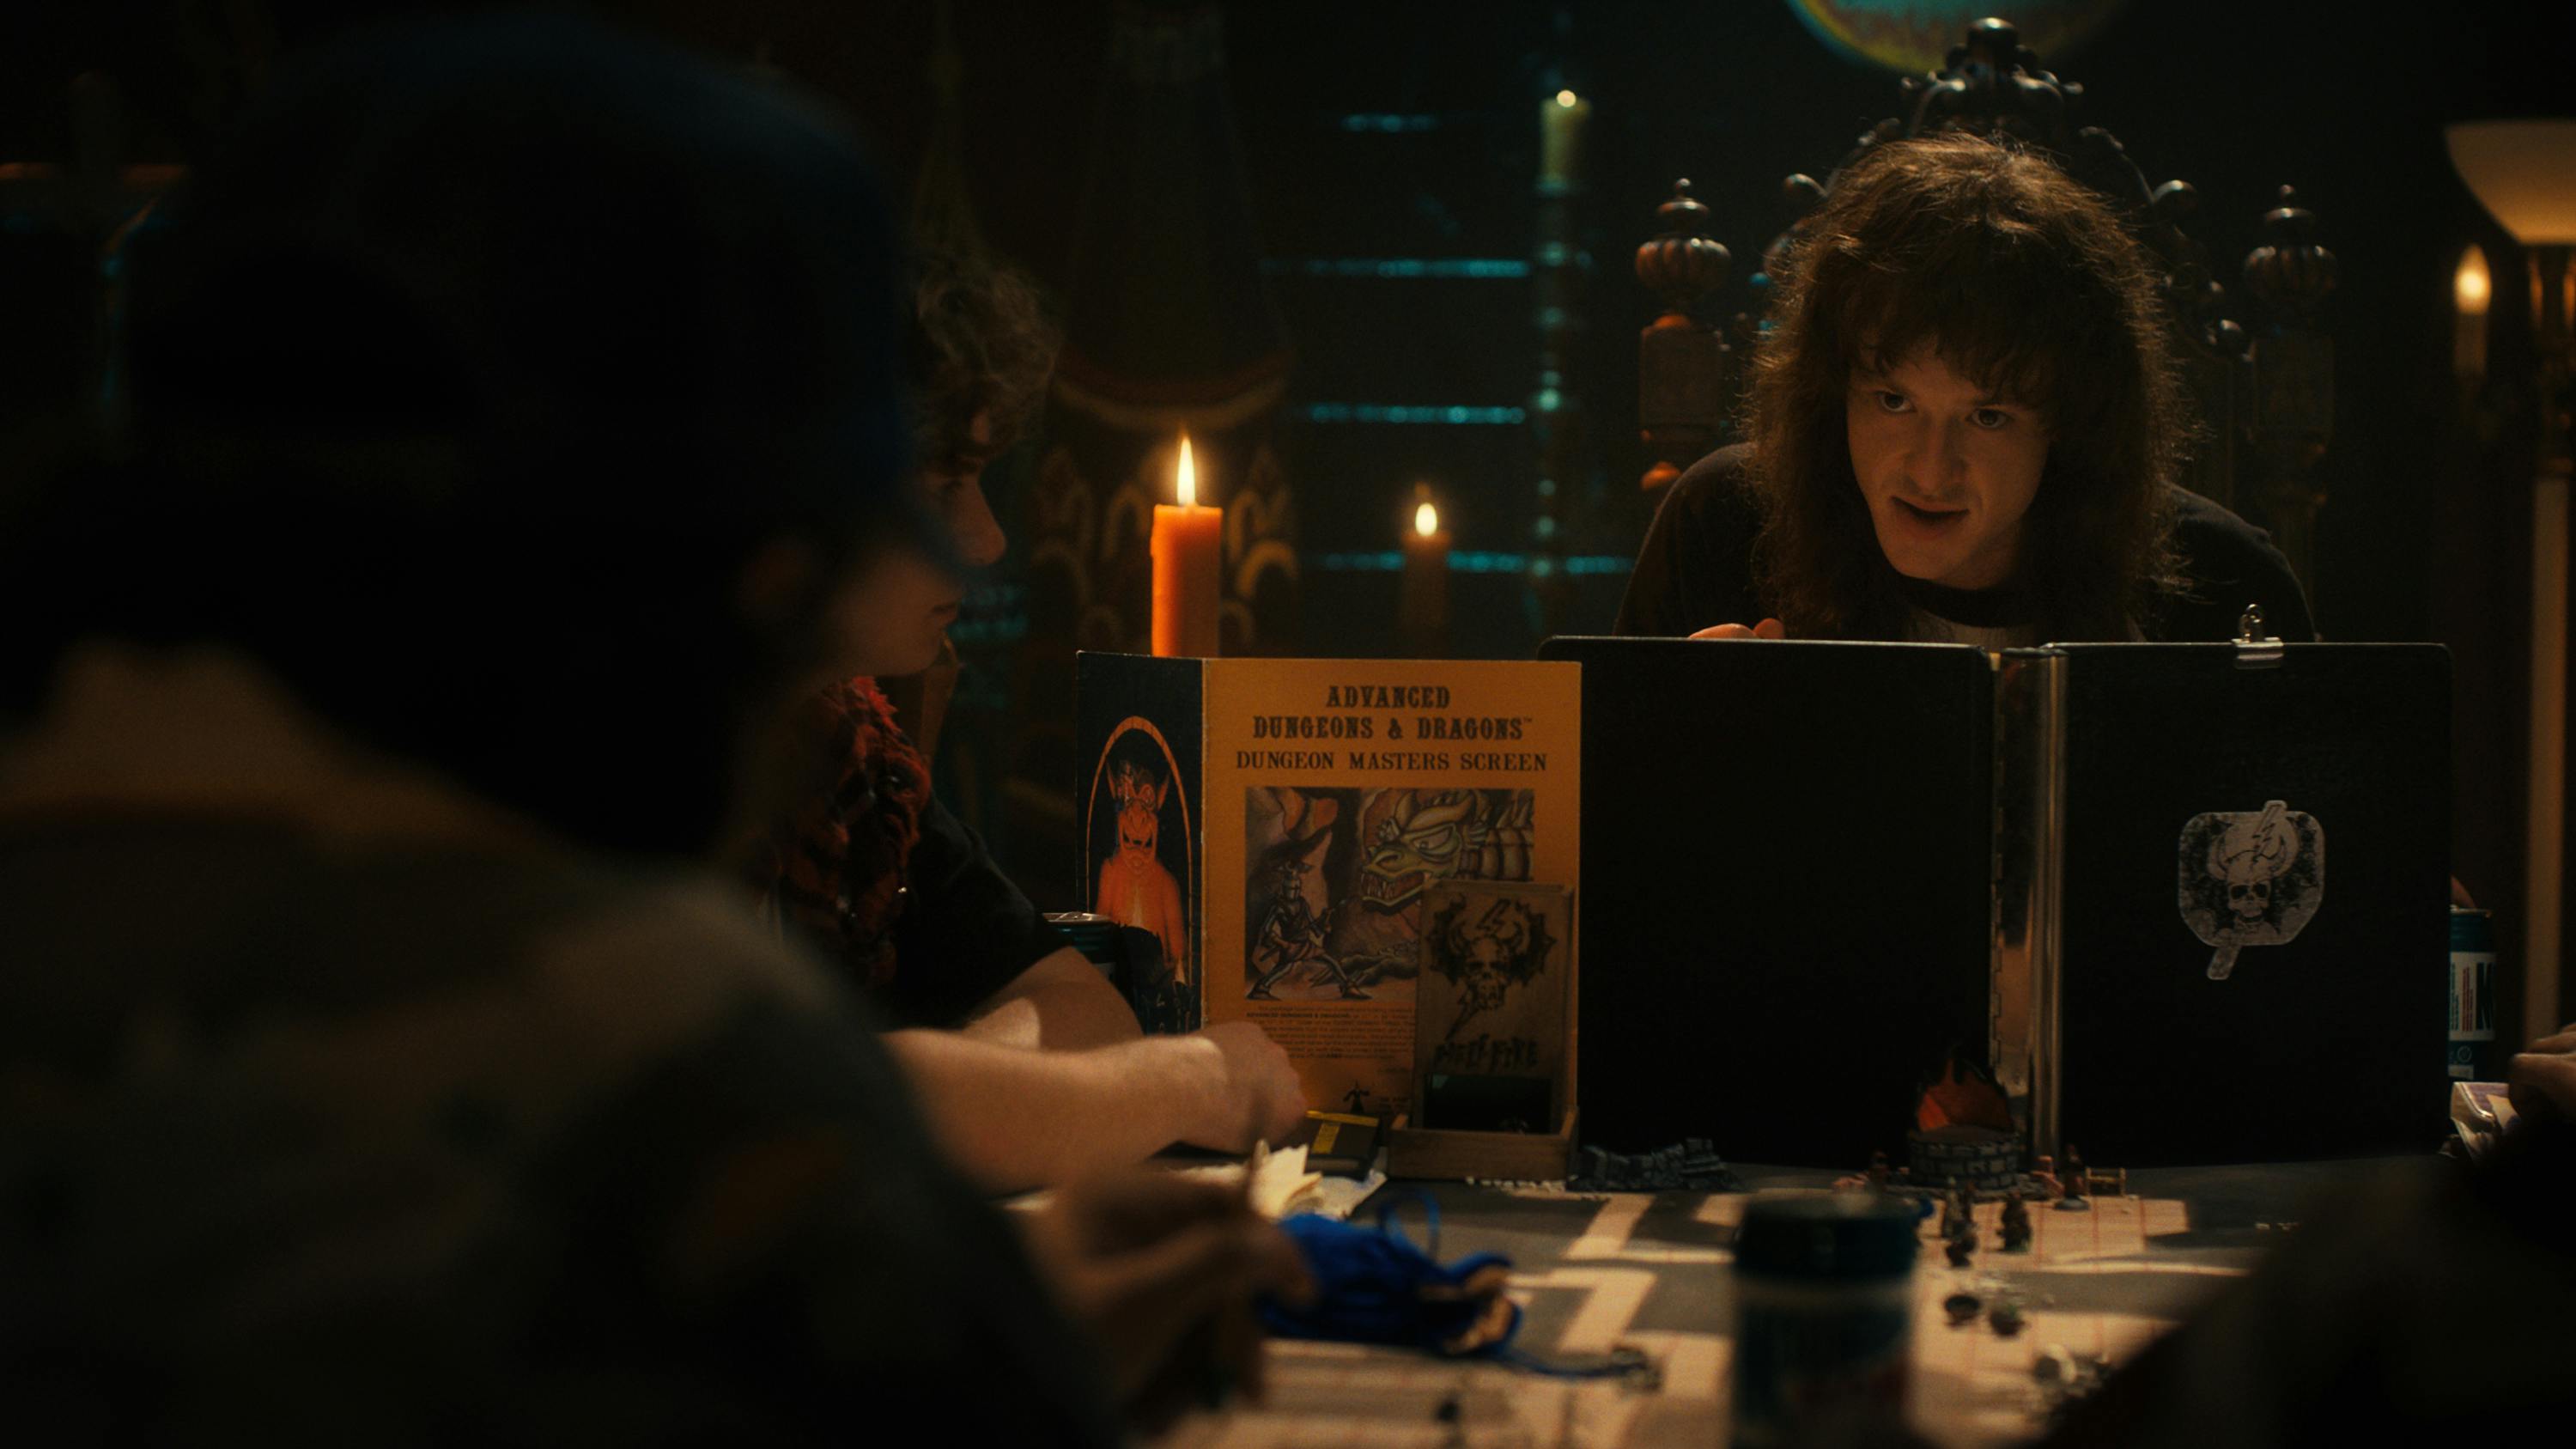 Eddie Munson (Joseph Quinn) plays Dungeons and Dragons by candlelight.